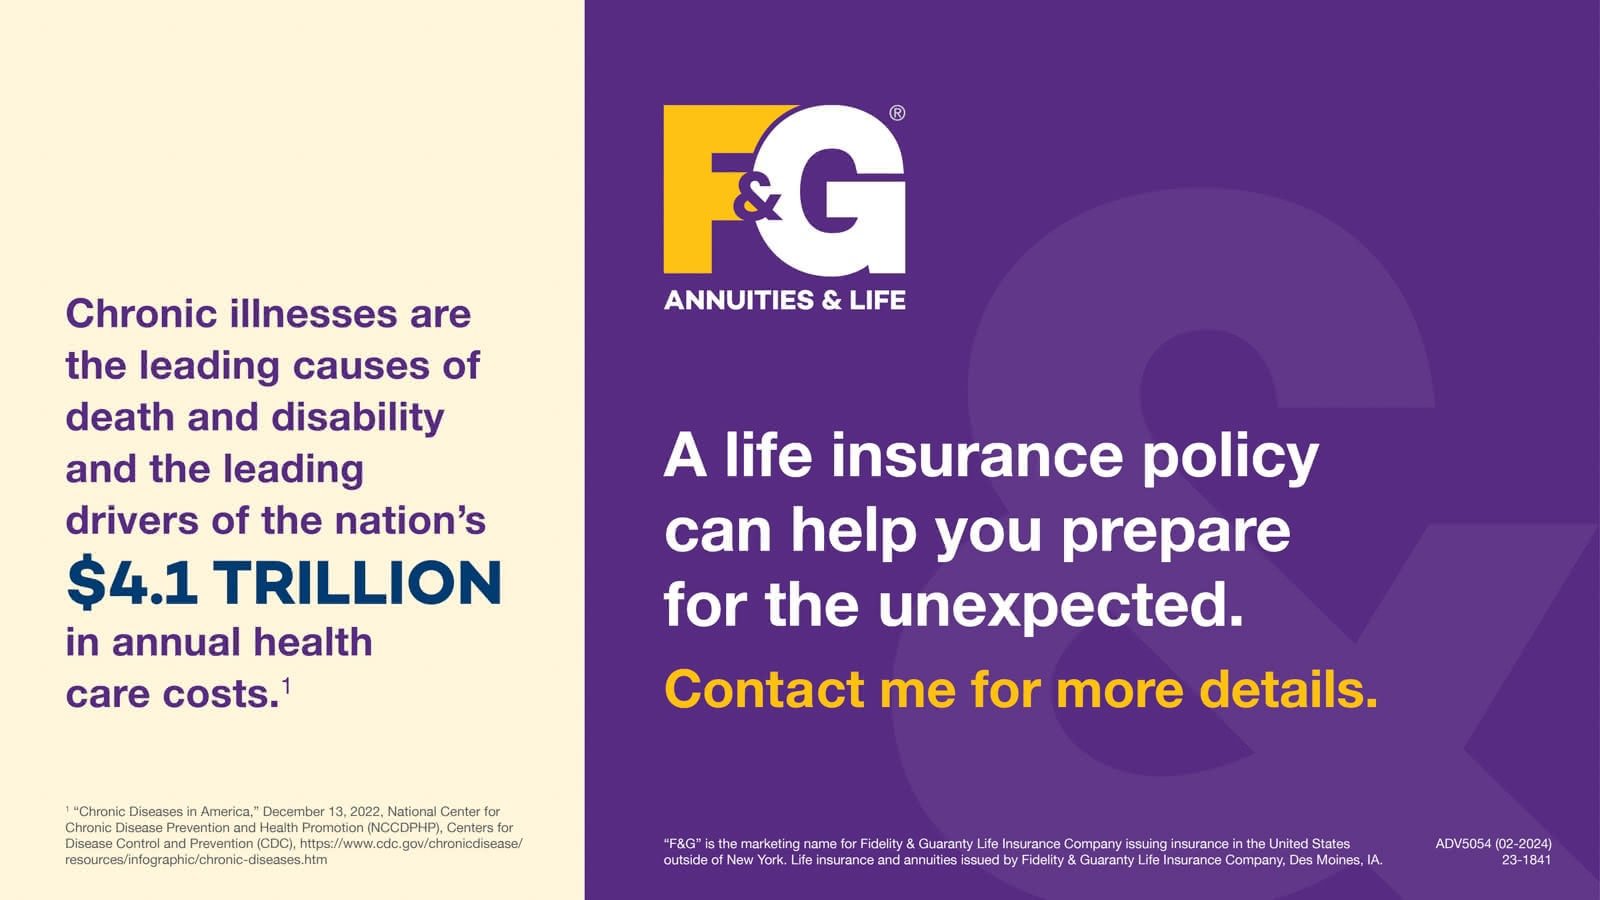 Chronic illnesses are the leading causes of death and disability and the leading drivers of the nation’s $4.1 TRILLION in annual health care costs.1A life insurance policy can help you prepare for the